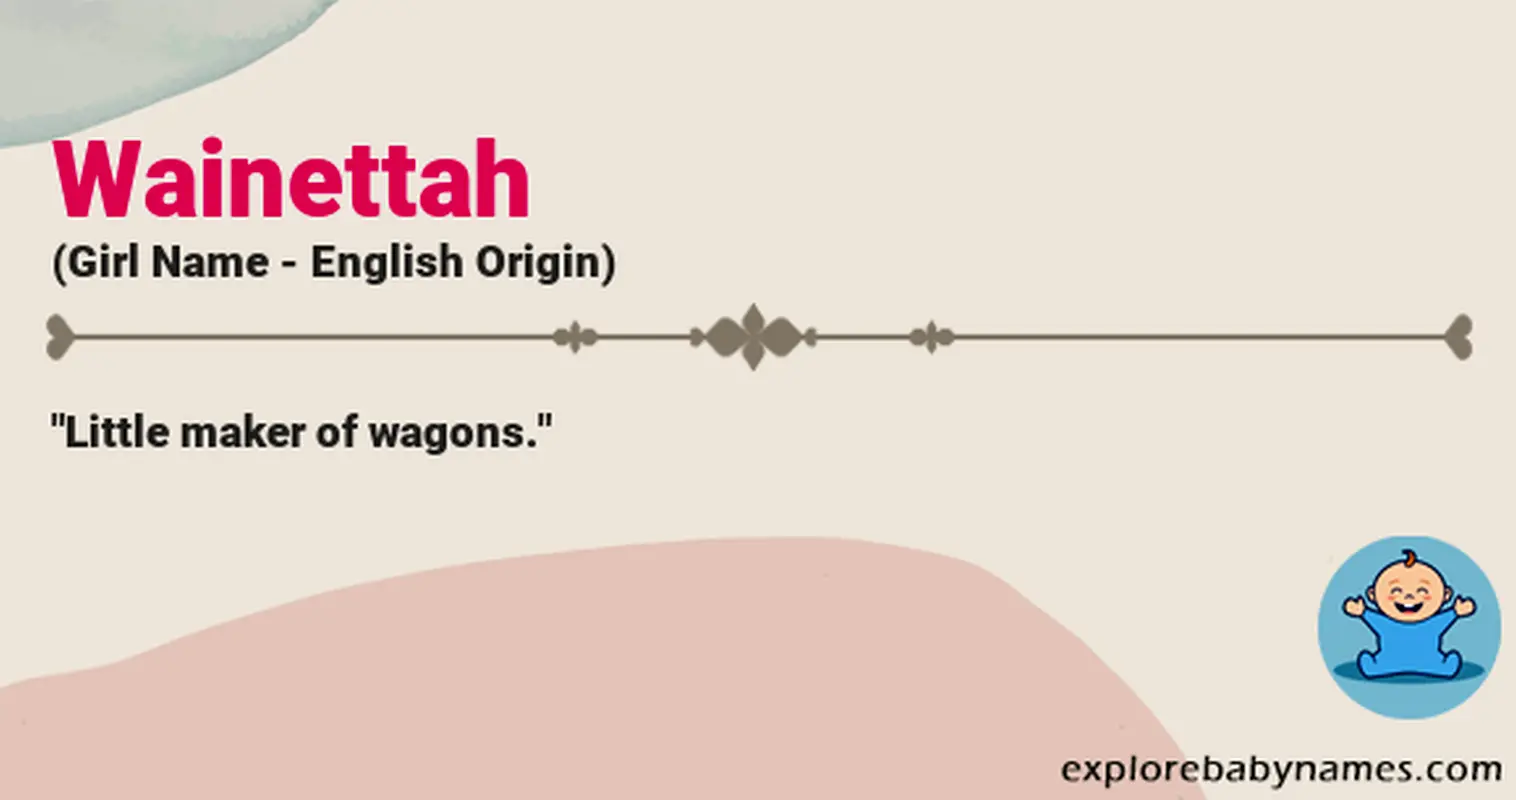 Meaning of Wainettah